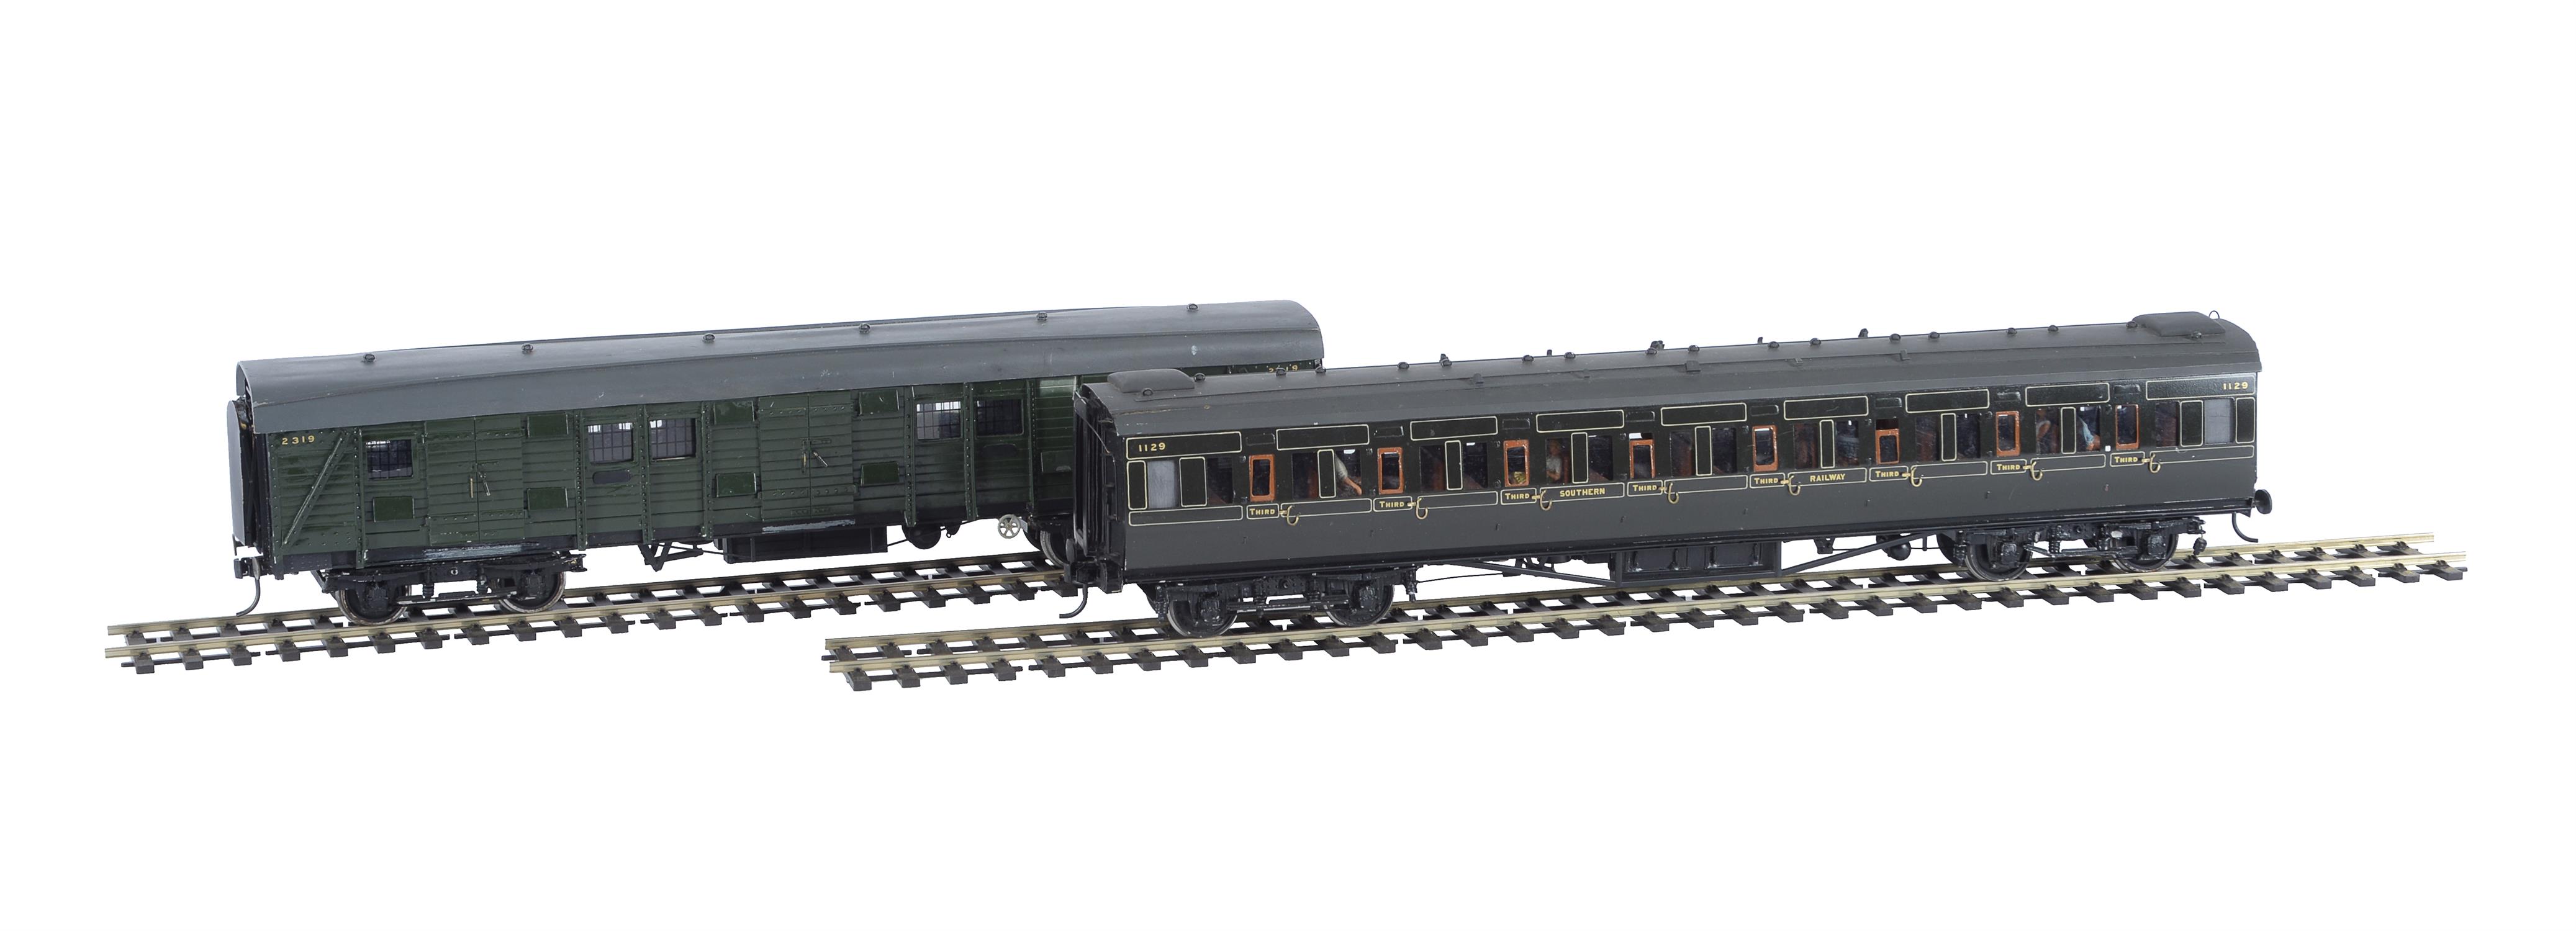 A rake of 10mm scale gauge 1 Southern Railway Maunsell coaches - Image 3 of 10